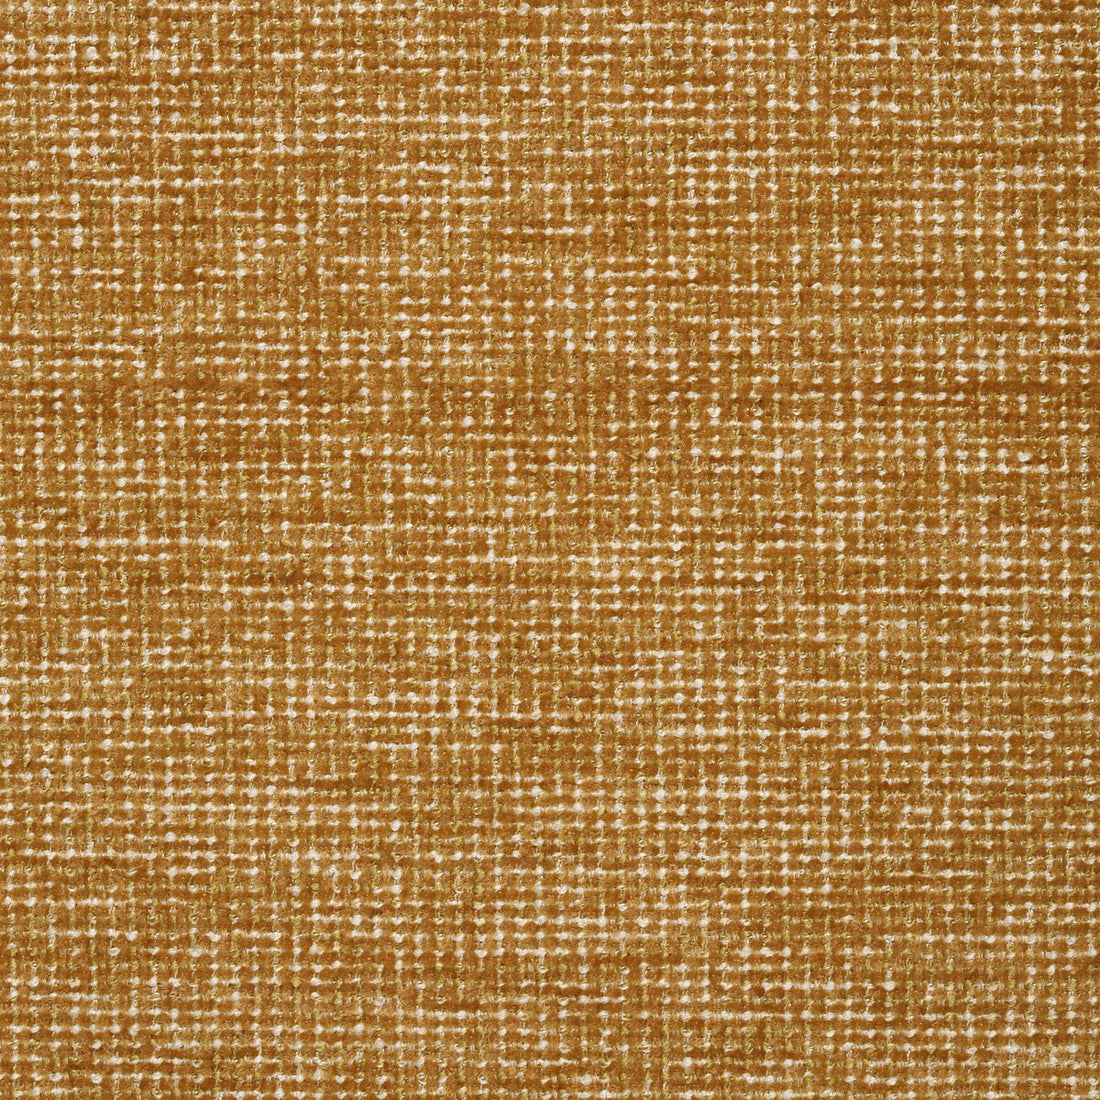 Kravet Contract fabric in 35116-12 color - pattern 35116.12.0 - by Kravet Contract in the Crypton Incase collection